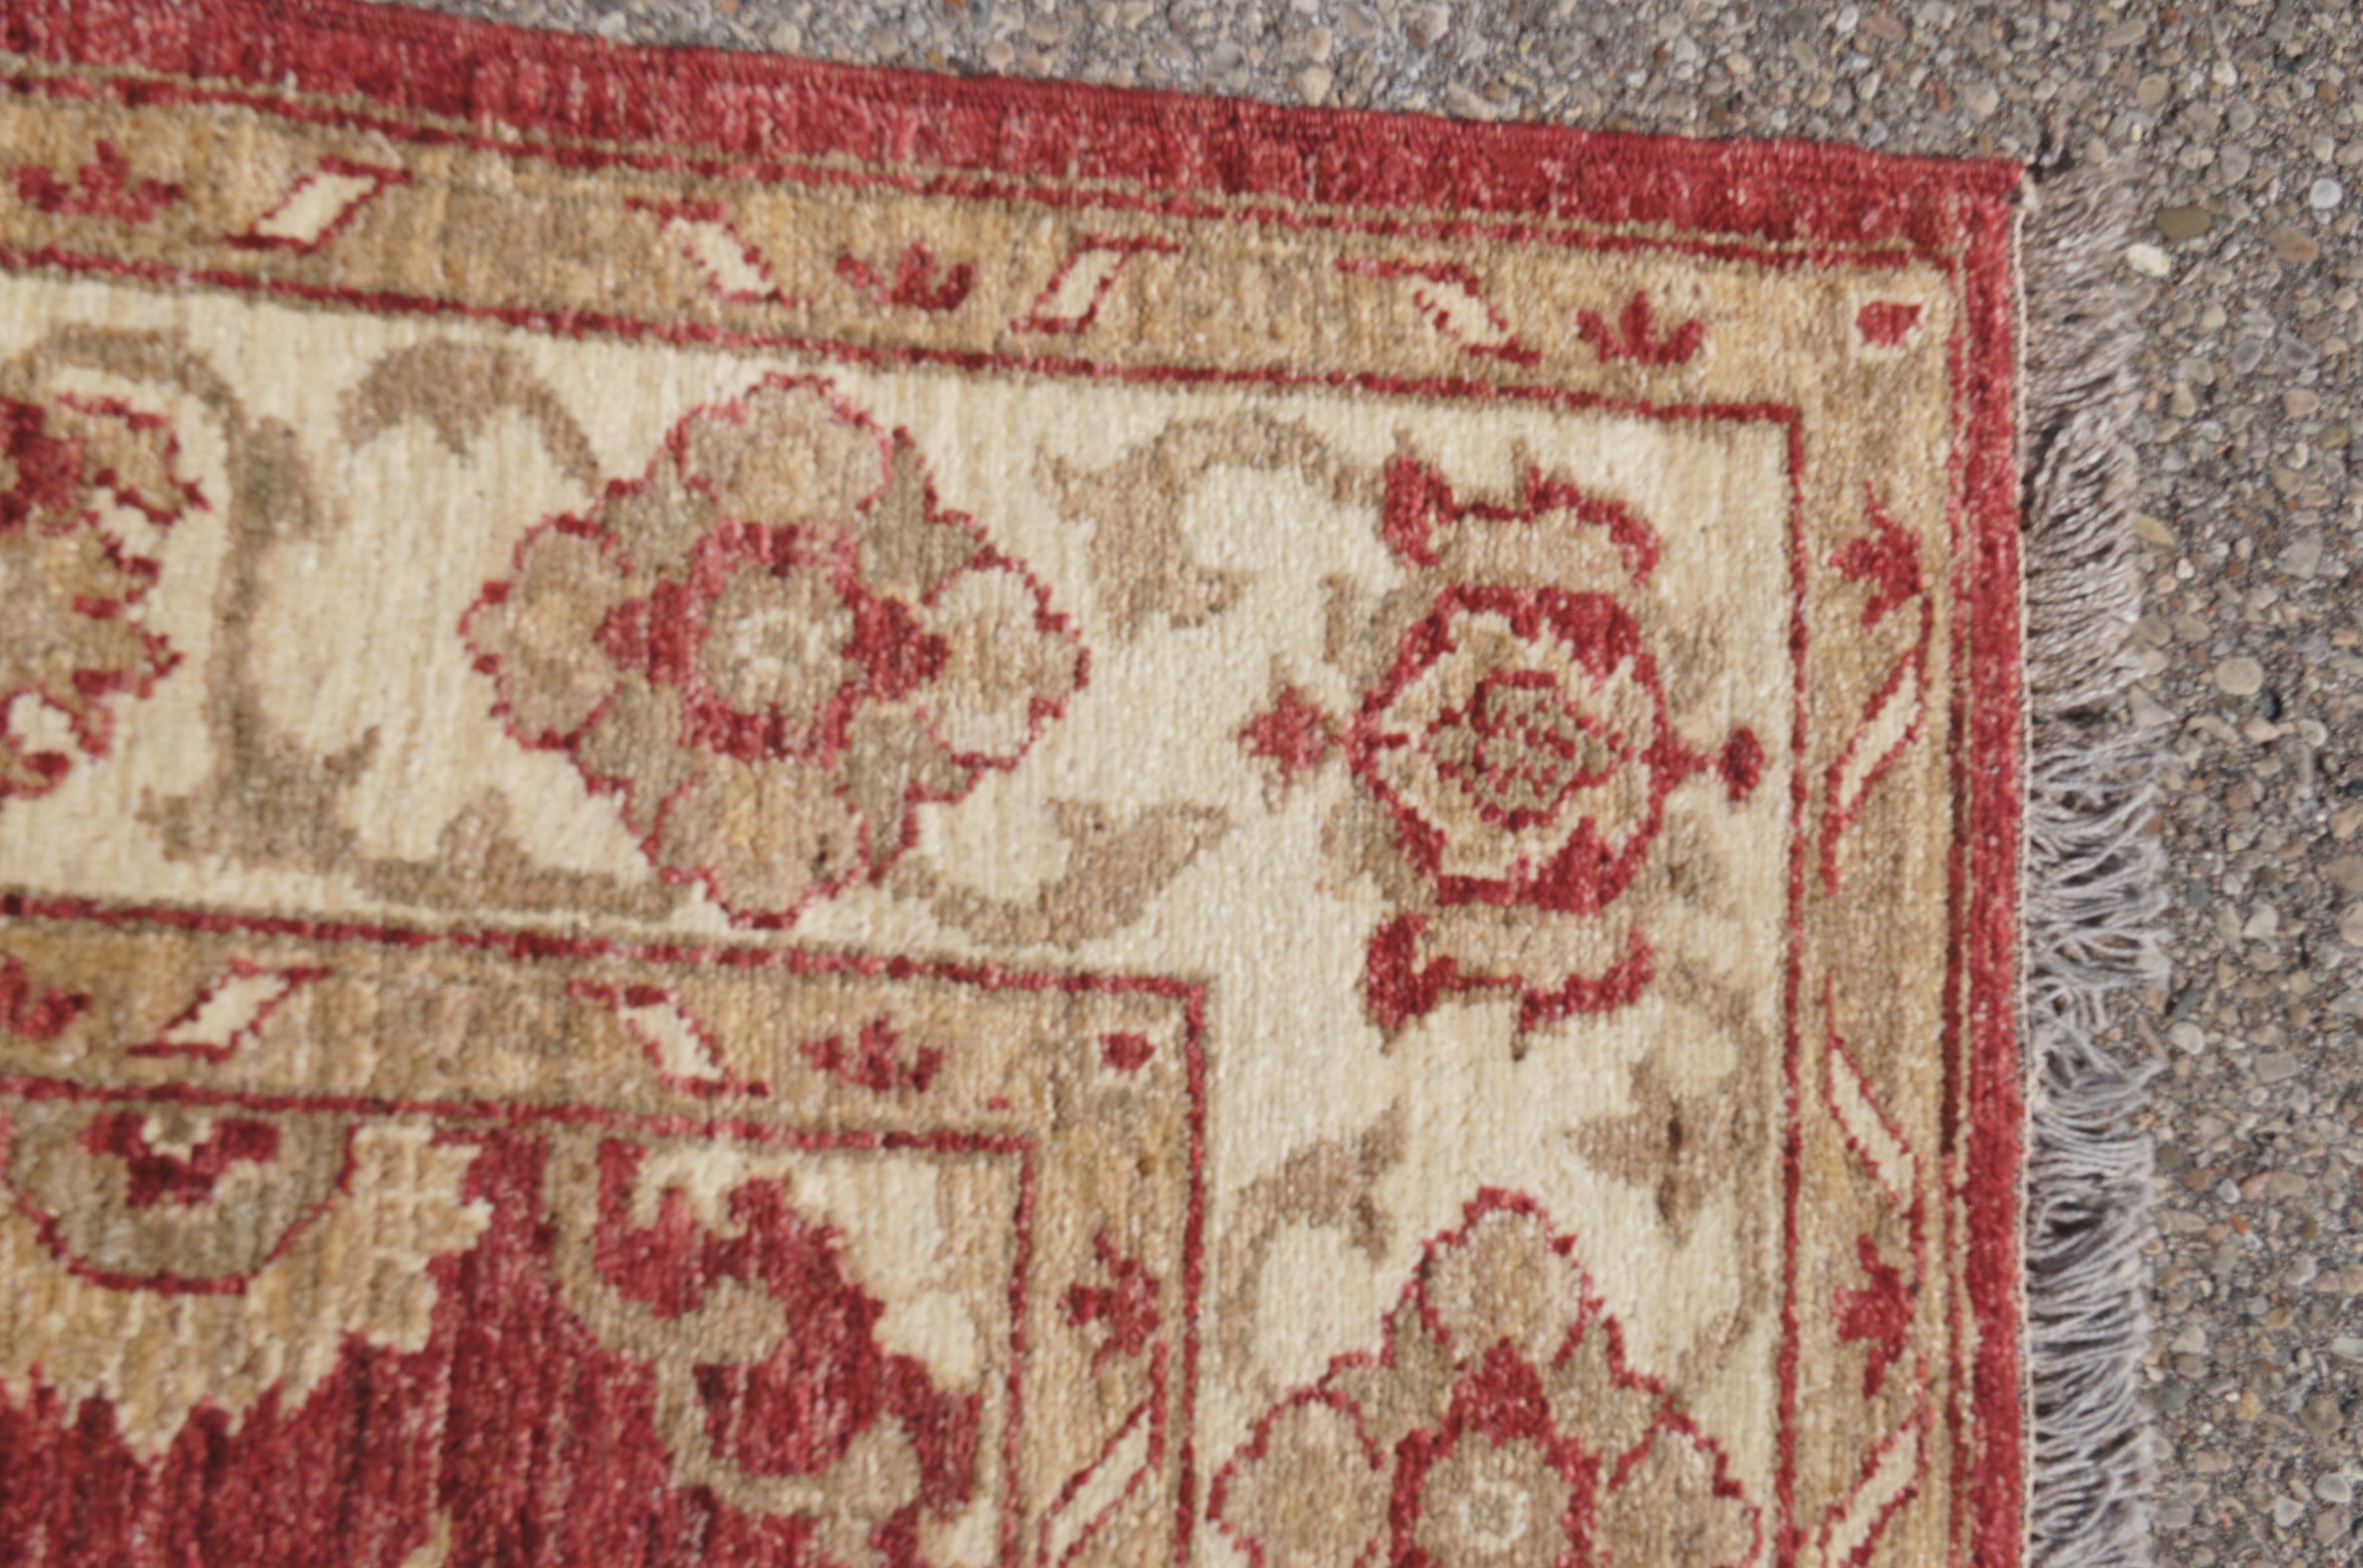 Hand Woven Turkish Red & Beige Geometric Floral Wool Carpet Area Rug 5' x 7' For Sale 5